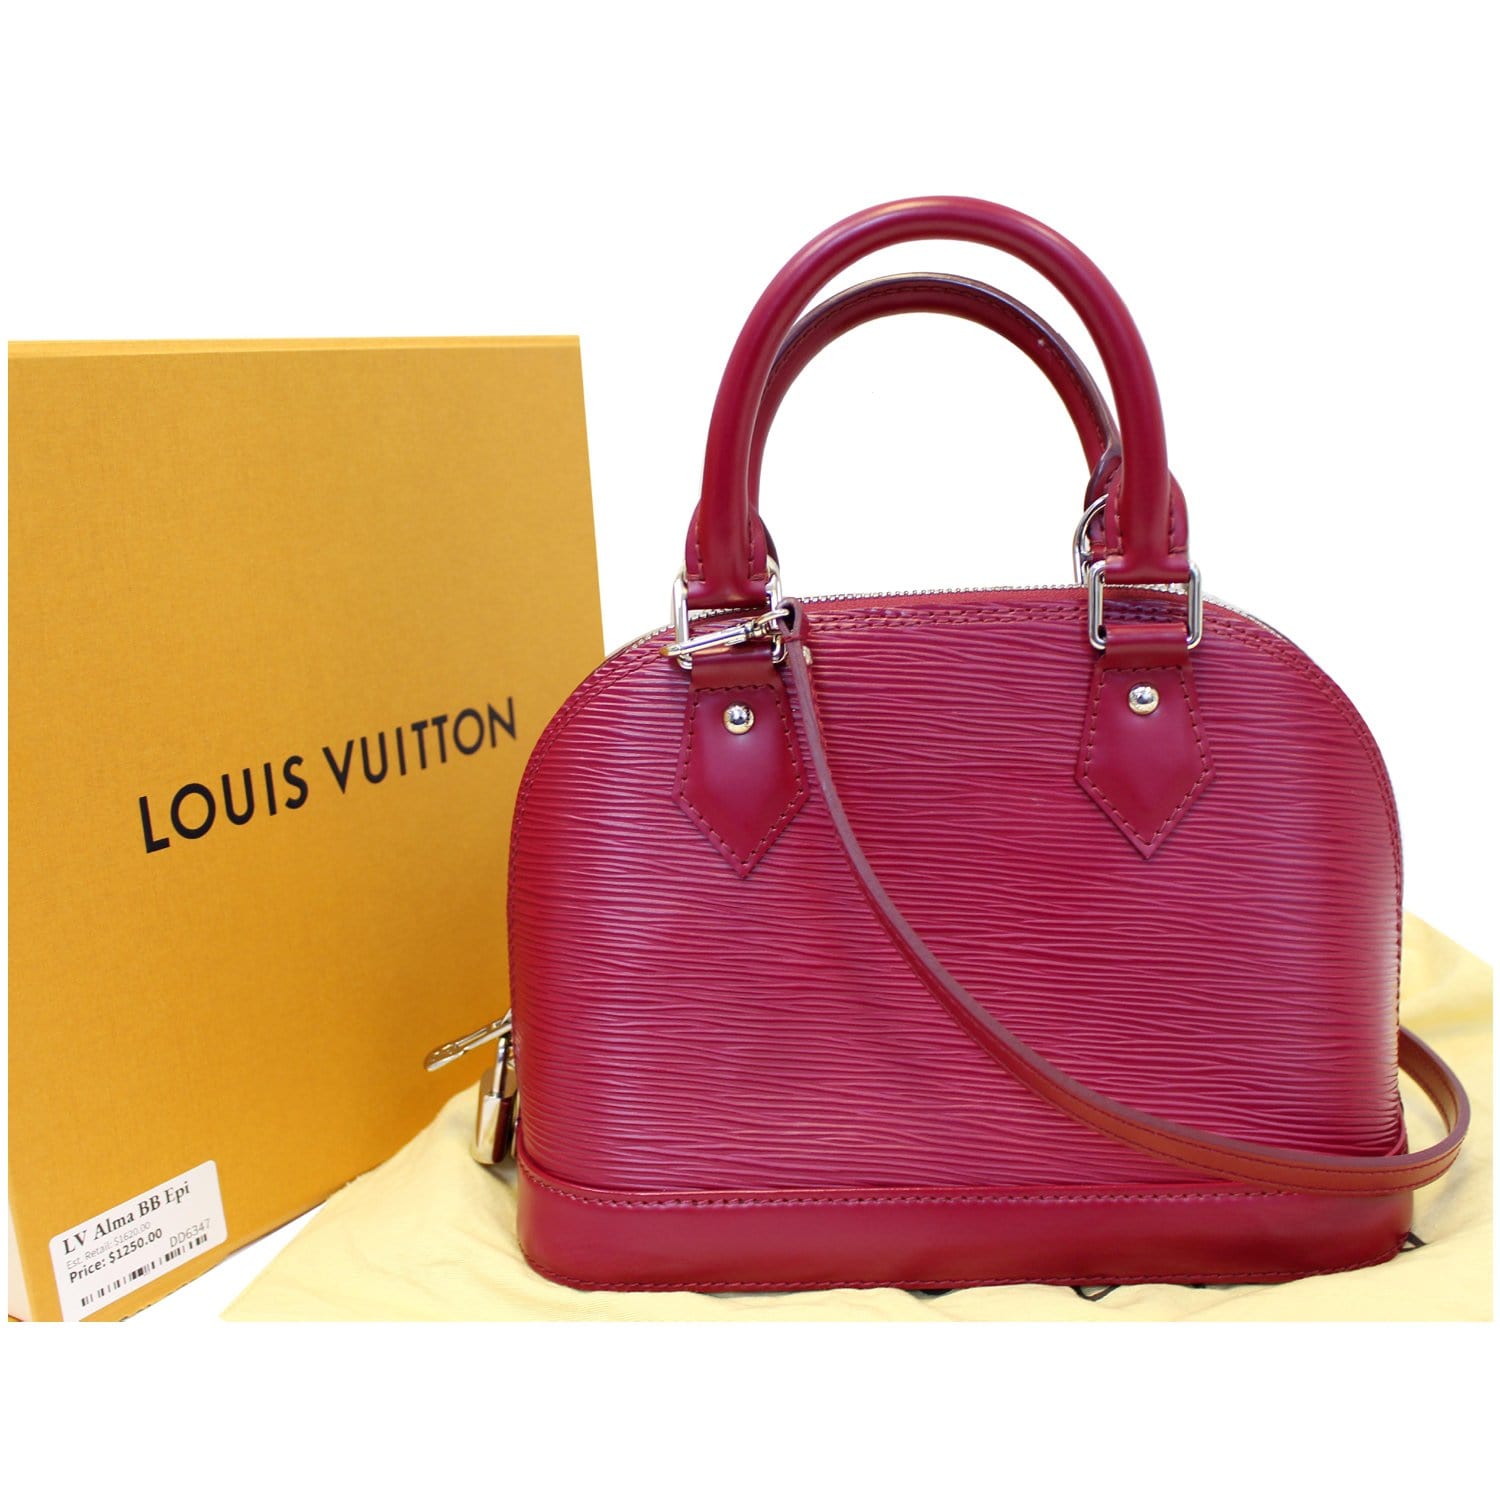 Louis Vuitton Alma pm Epi leather in Fuschia review and what fits